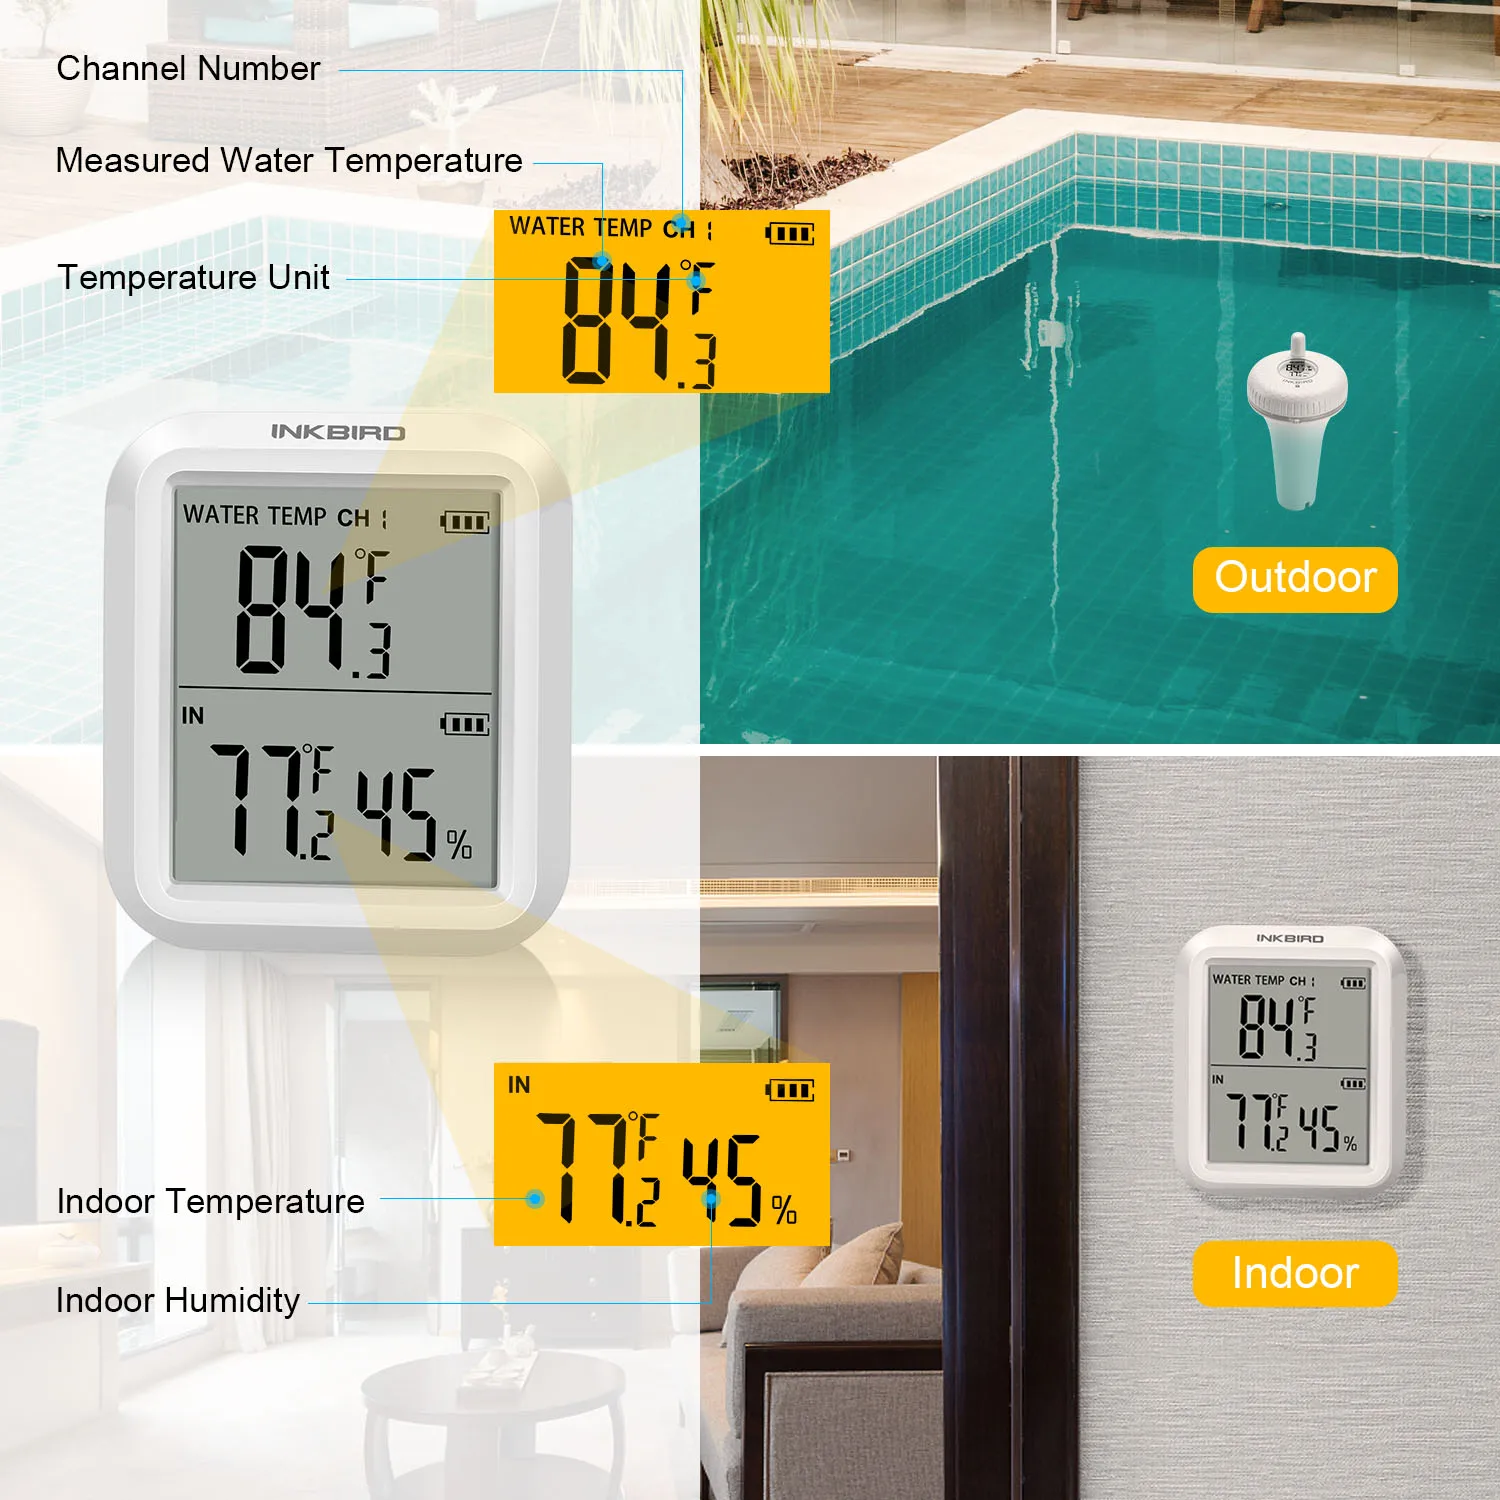 INKBIRD IBS-P02R Digital Pool Thermometer Indoor Outdoor 300Feet Wireless  Temperature Humidity Monitor for Hot Tub Aquarium Pond - AliExpress